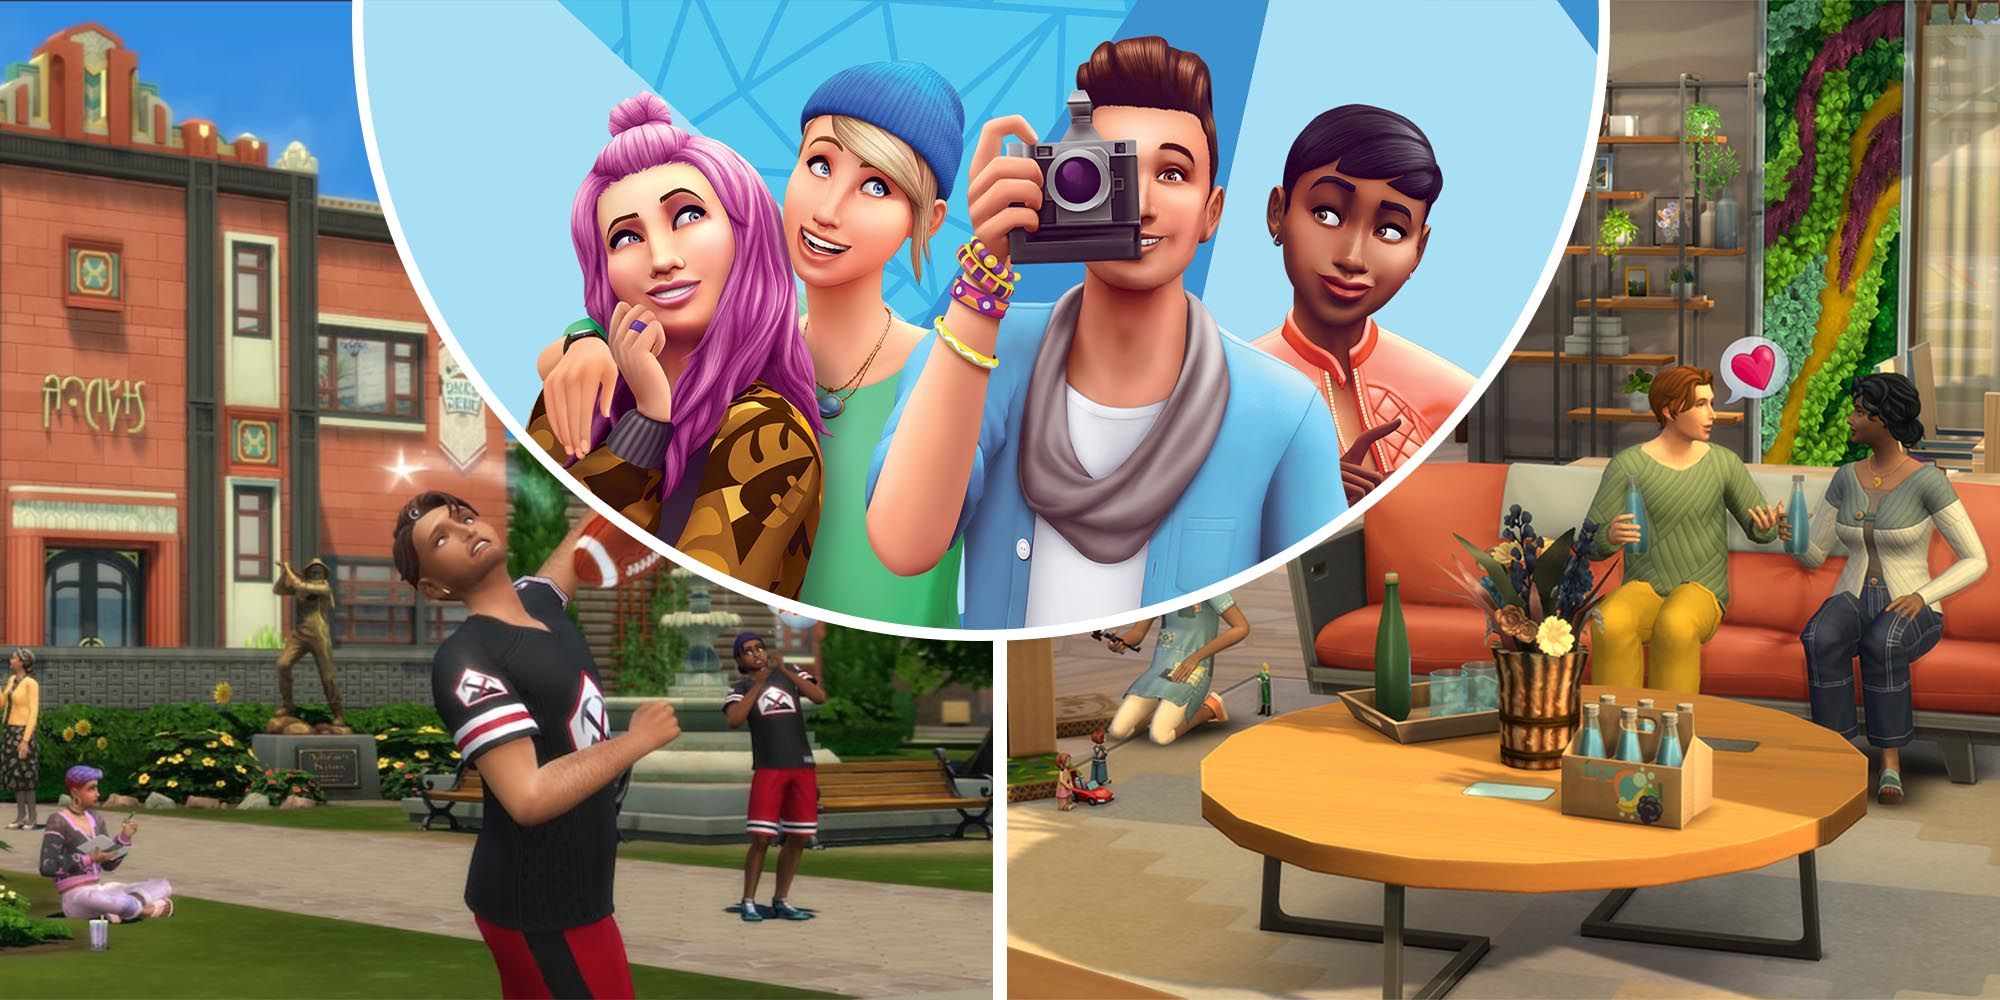 The Sims 4 is on Origin Game Time! Try it for free for 48 hours!